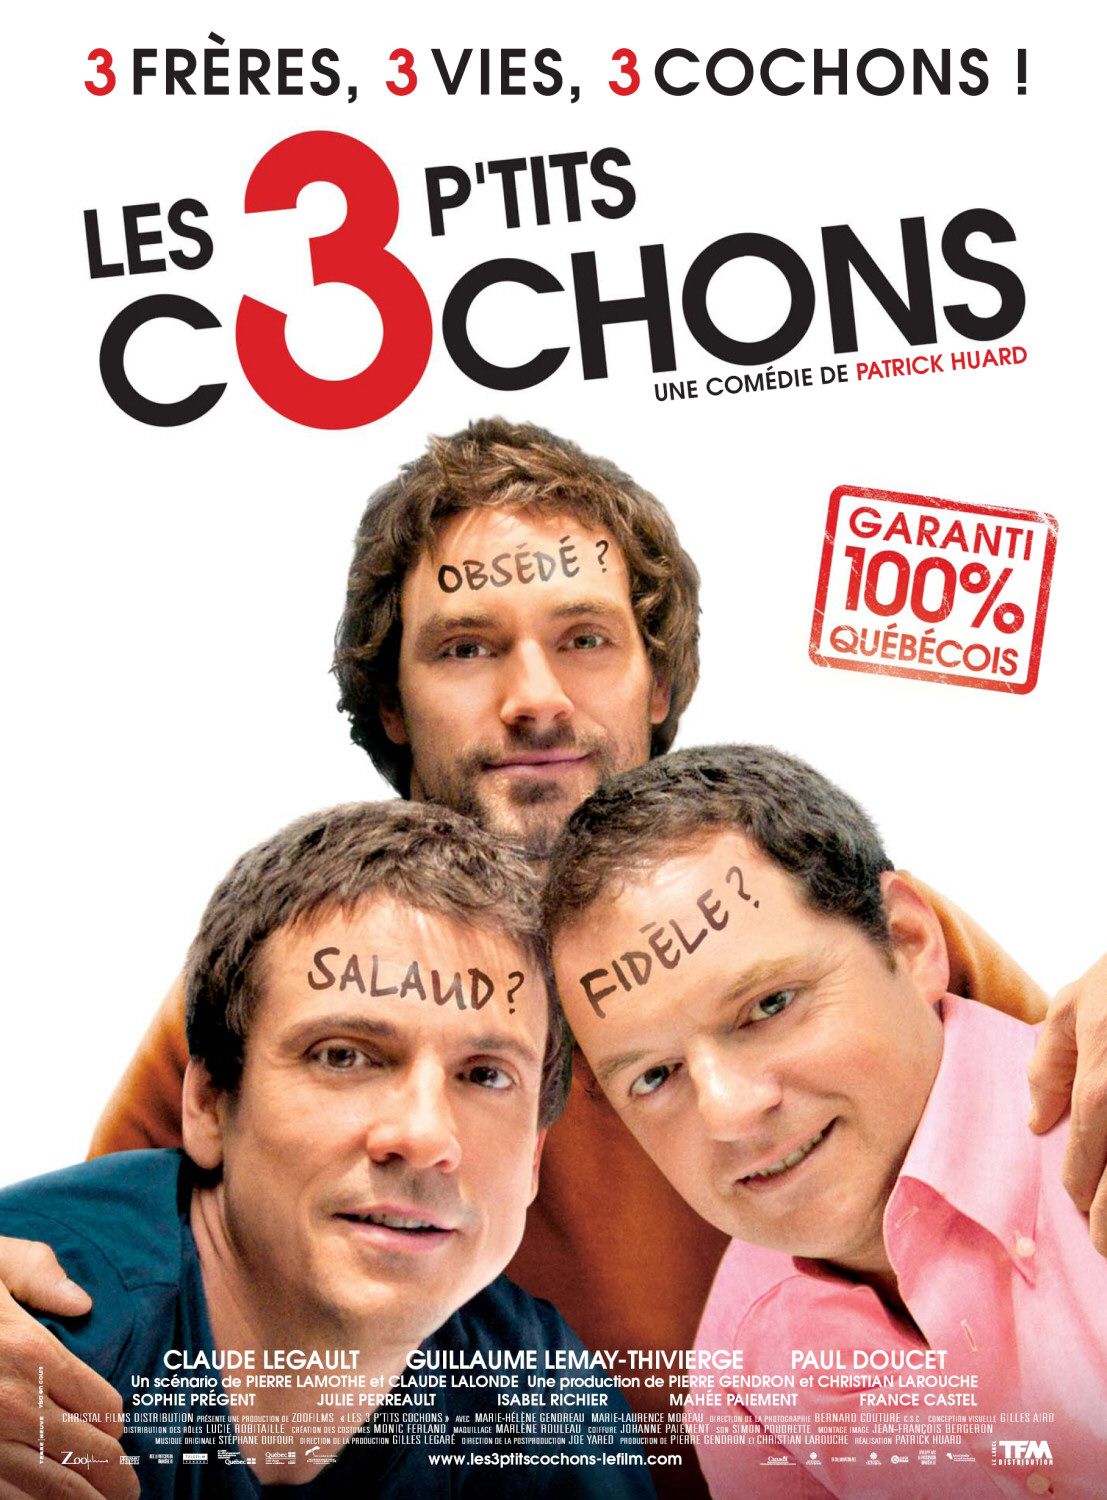 3 p'tits cochons, Les (#2 of 2): Extra Large Movie Poster Image - IMP ...